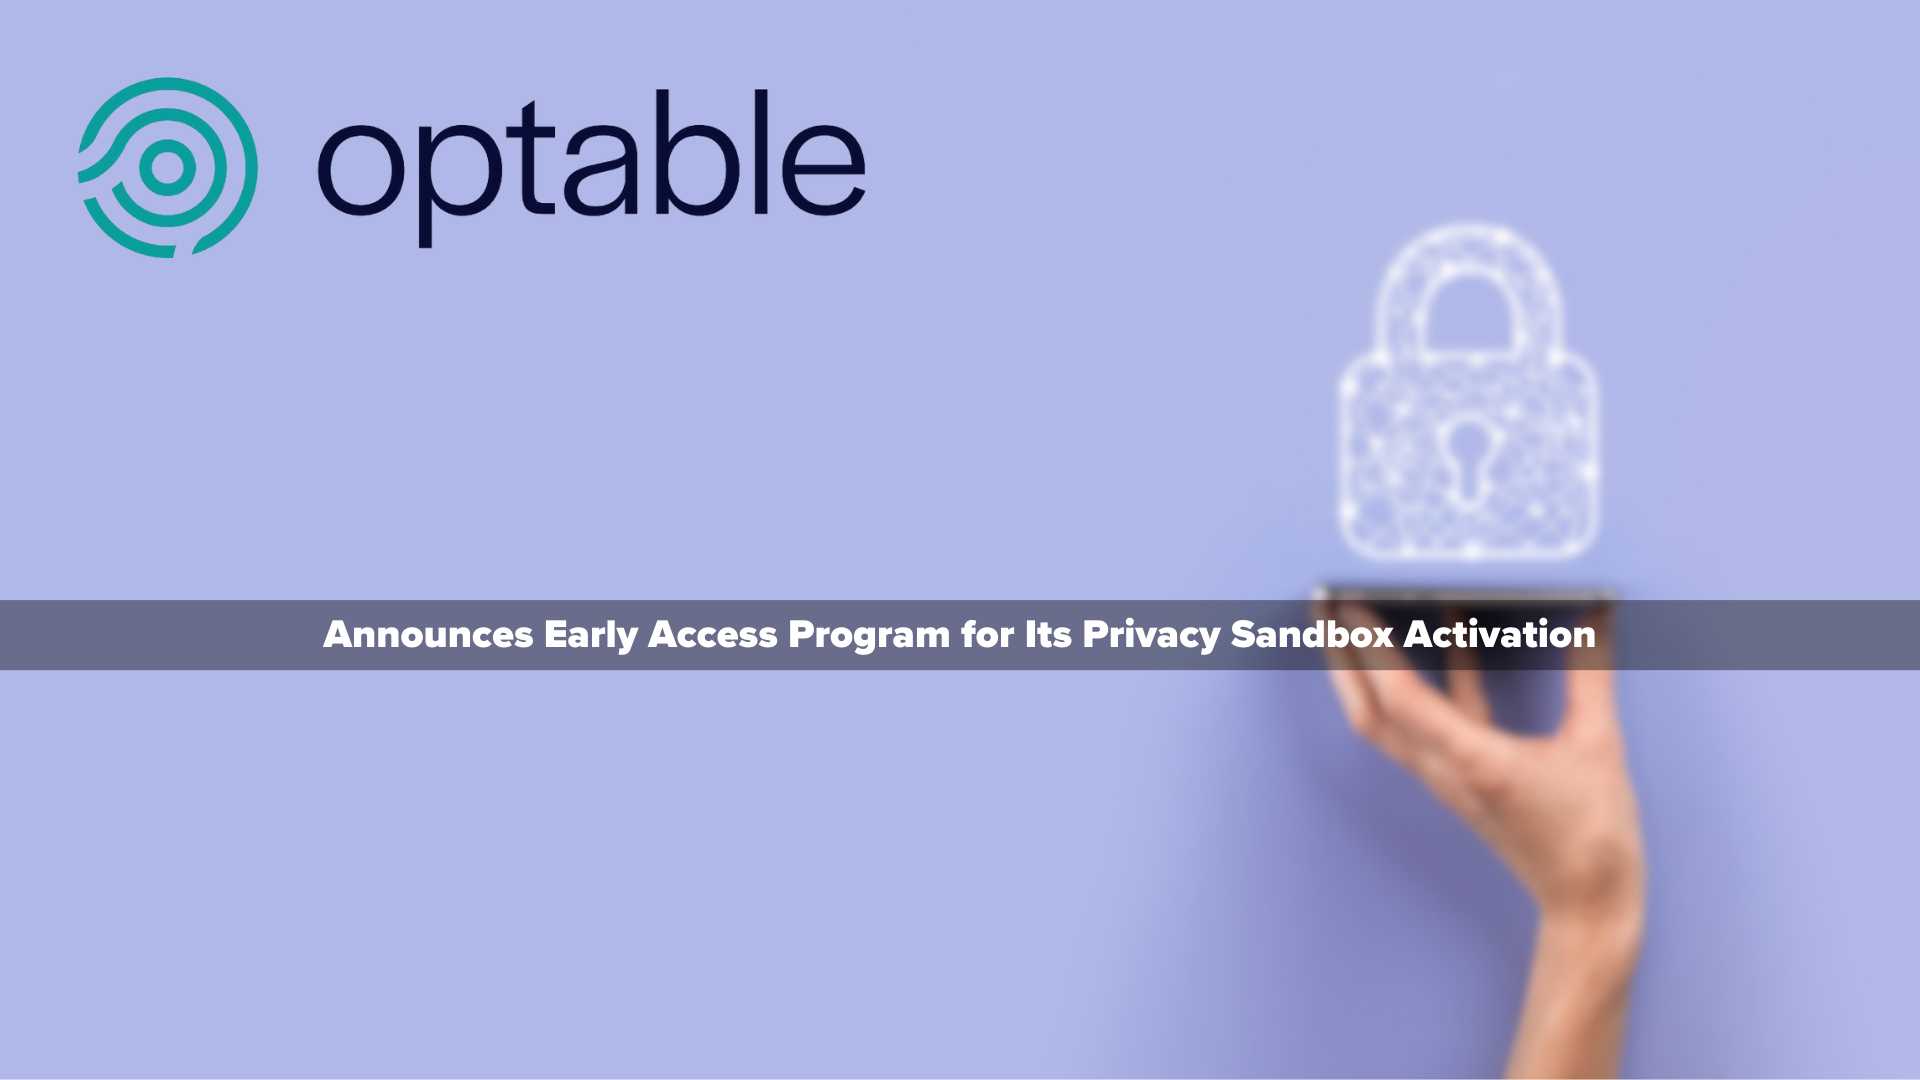 Optable Announces Early Access Program for Its Privacy Sandbox Activation